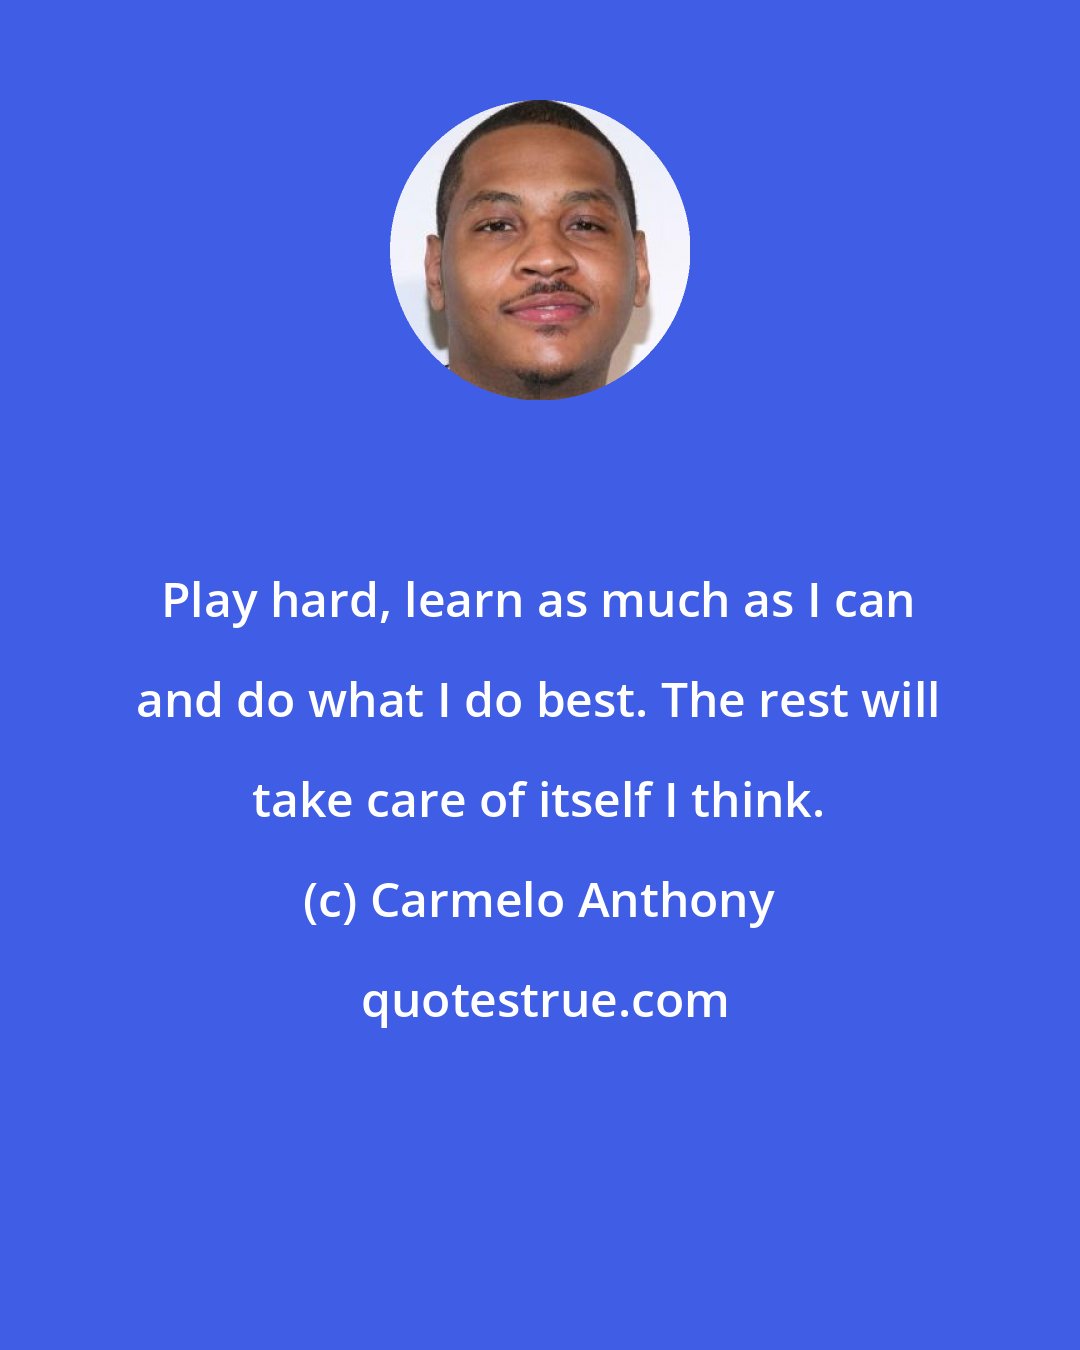 Carmelo Anthony: Play hard, learn as much as I can and do what I do best. The rest will take care of itself I think.